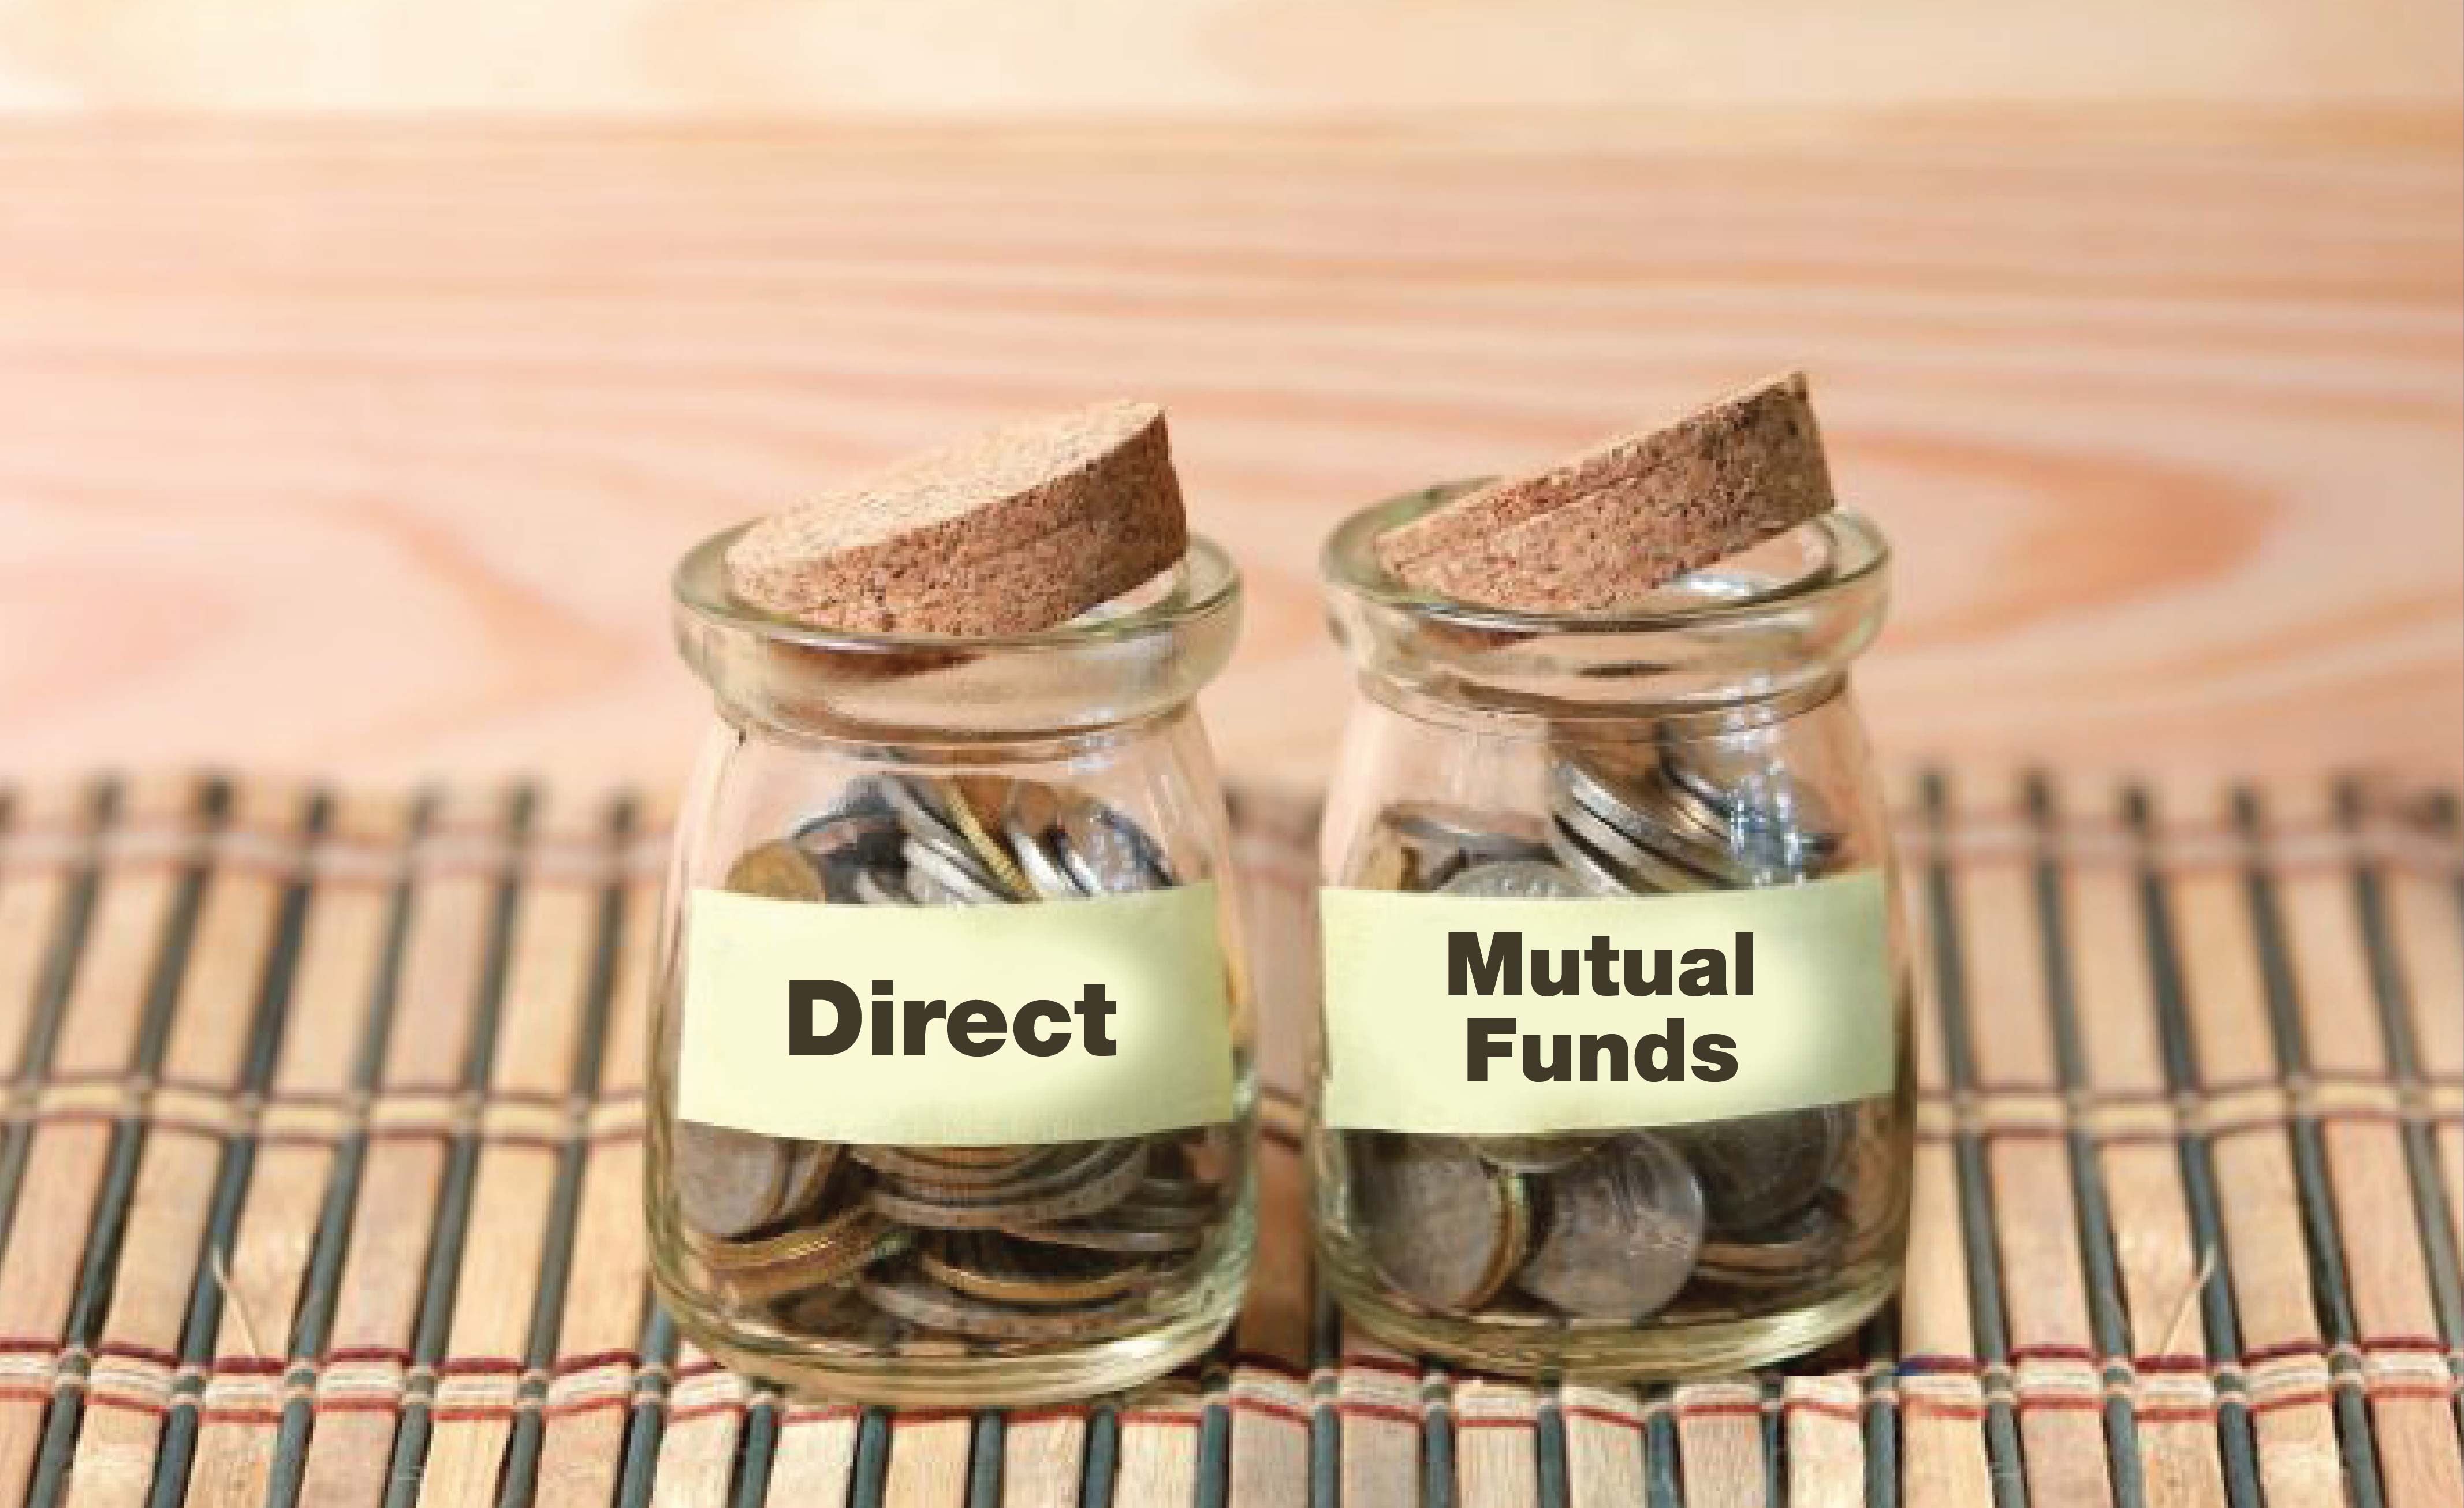 HDFC mutual fund investment plans